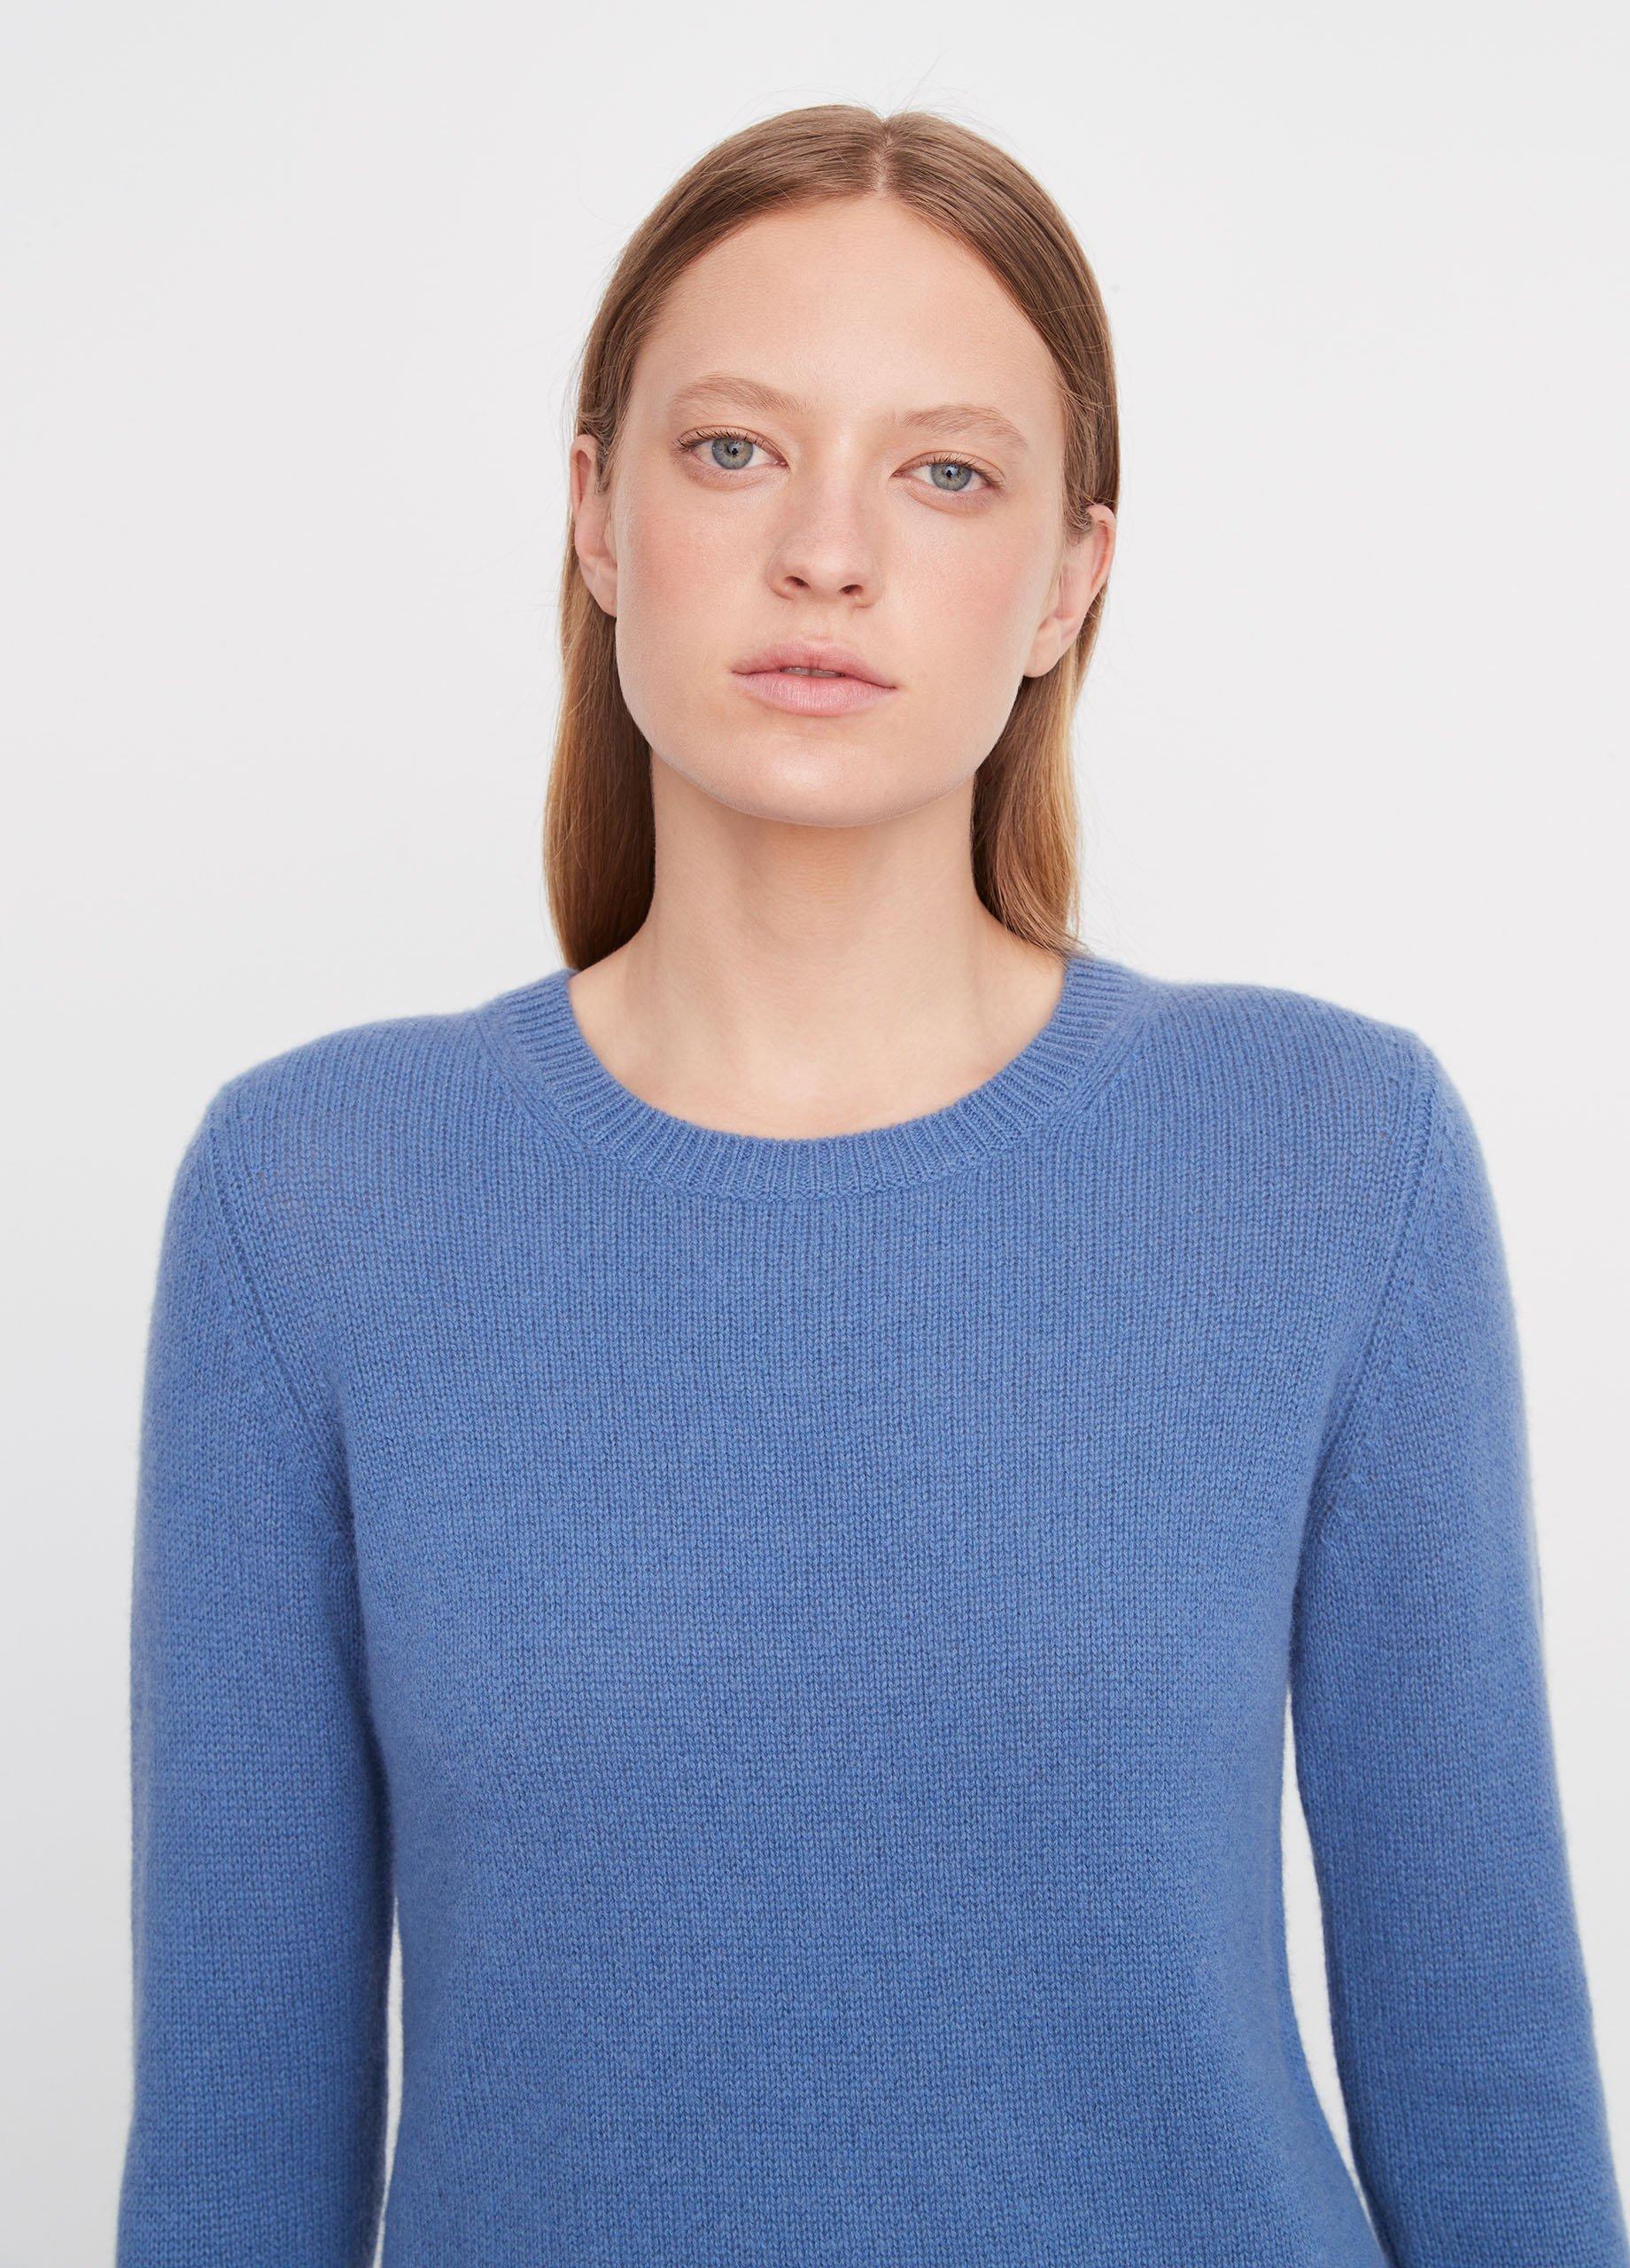 Cashmere Classic Crew Neck Sweater in Vince Products Women | Vince